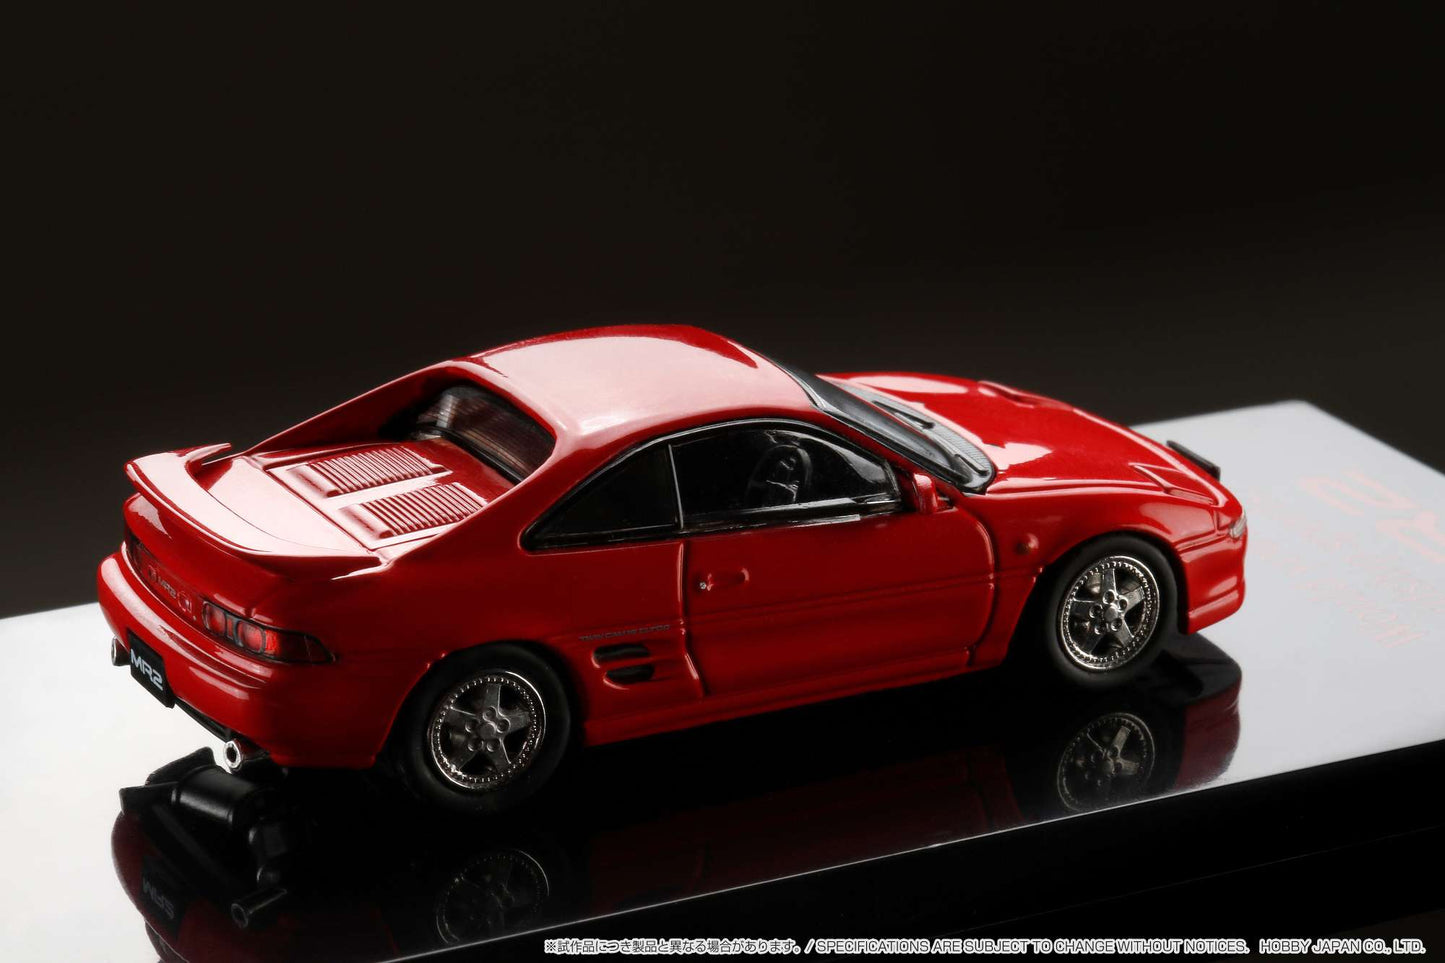 Hobby Japan 1/64 Toyota MR2 (SW20) GT-S Customized Version Red